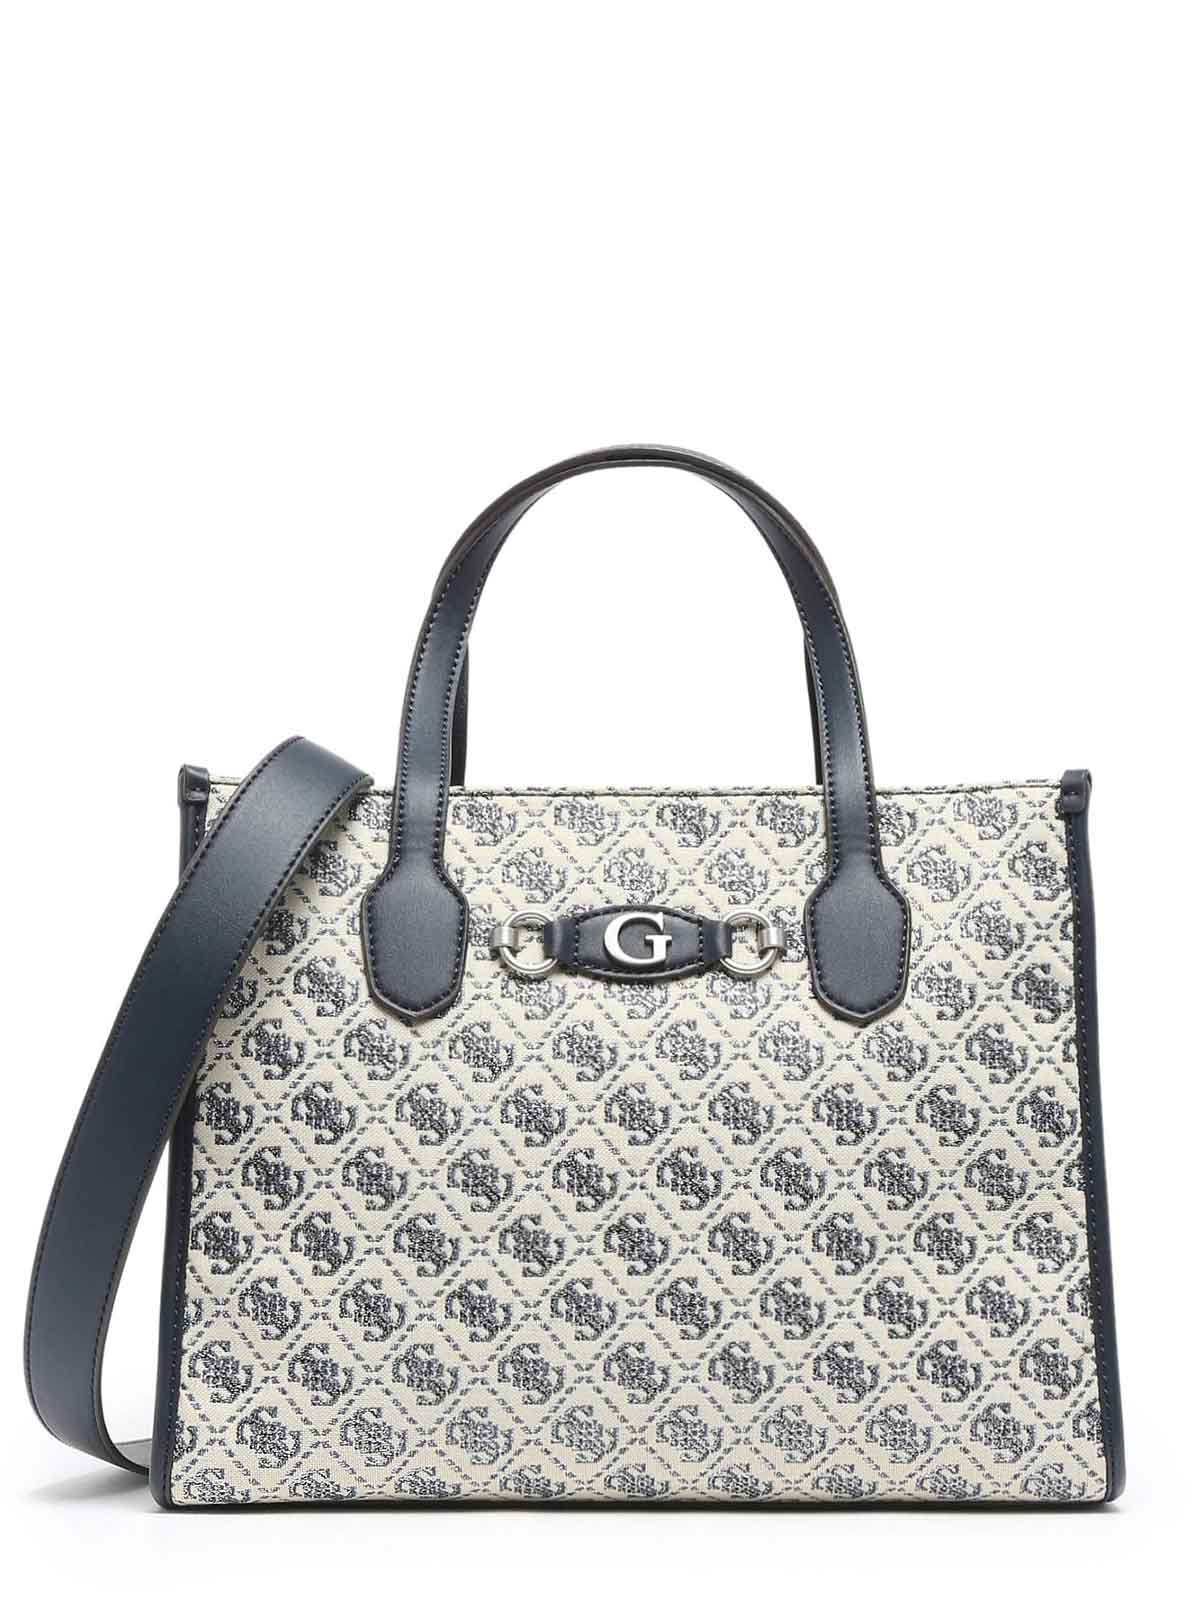   Guess | Izzy 2 Compartment Tote Bag |  